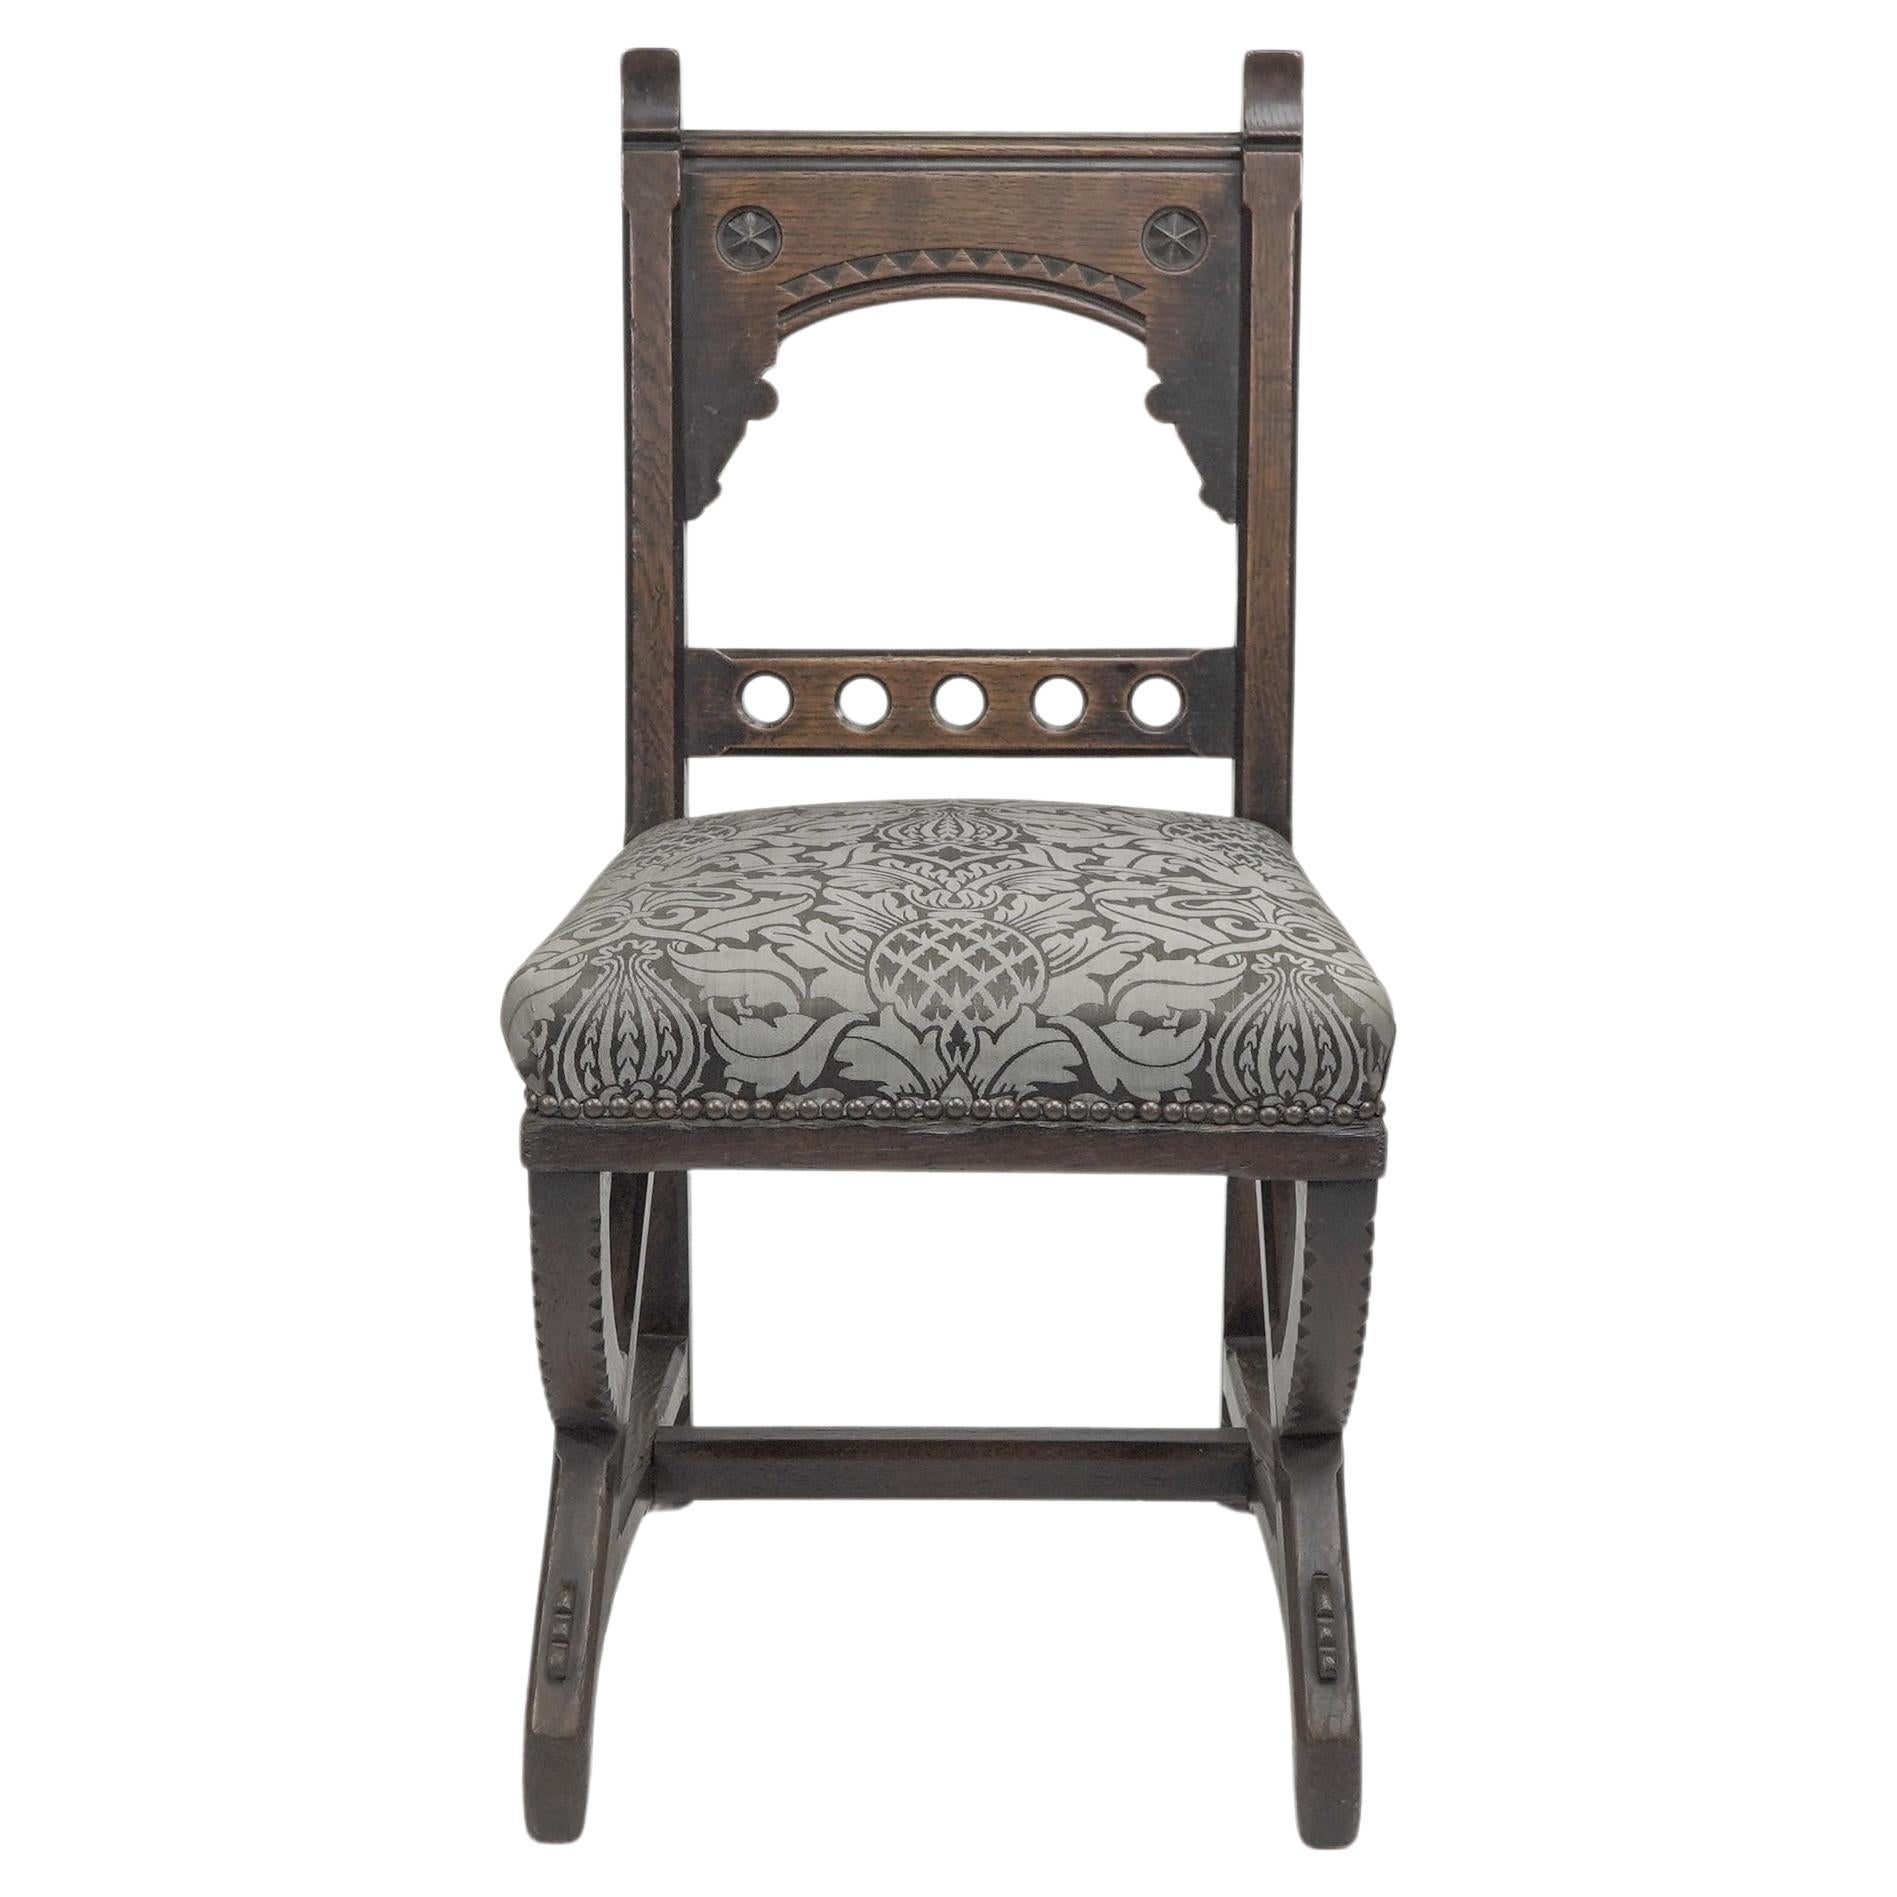 Charles Bevan (attributed), a Gothic Revival oak side chair, with rounded details to the upper backrest rail flanked by shaped uprights with carved and ebonized zig-zag bands to the top, and carved triangular details within the carved roundels, and